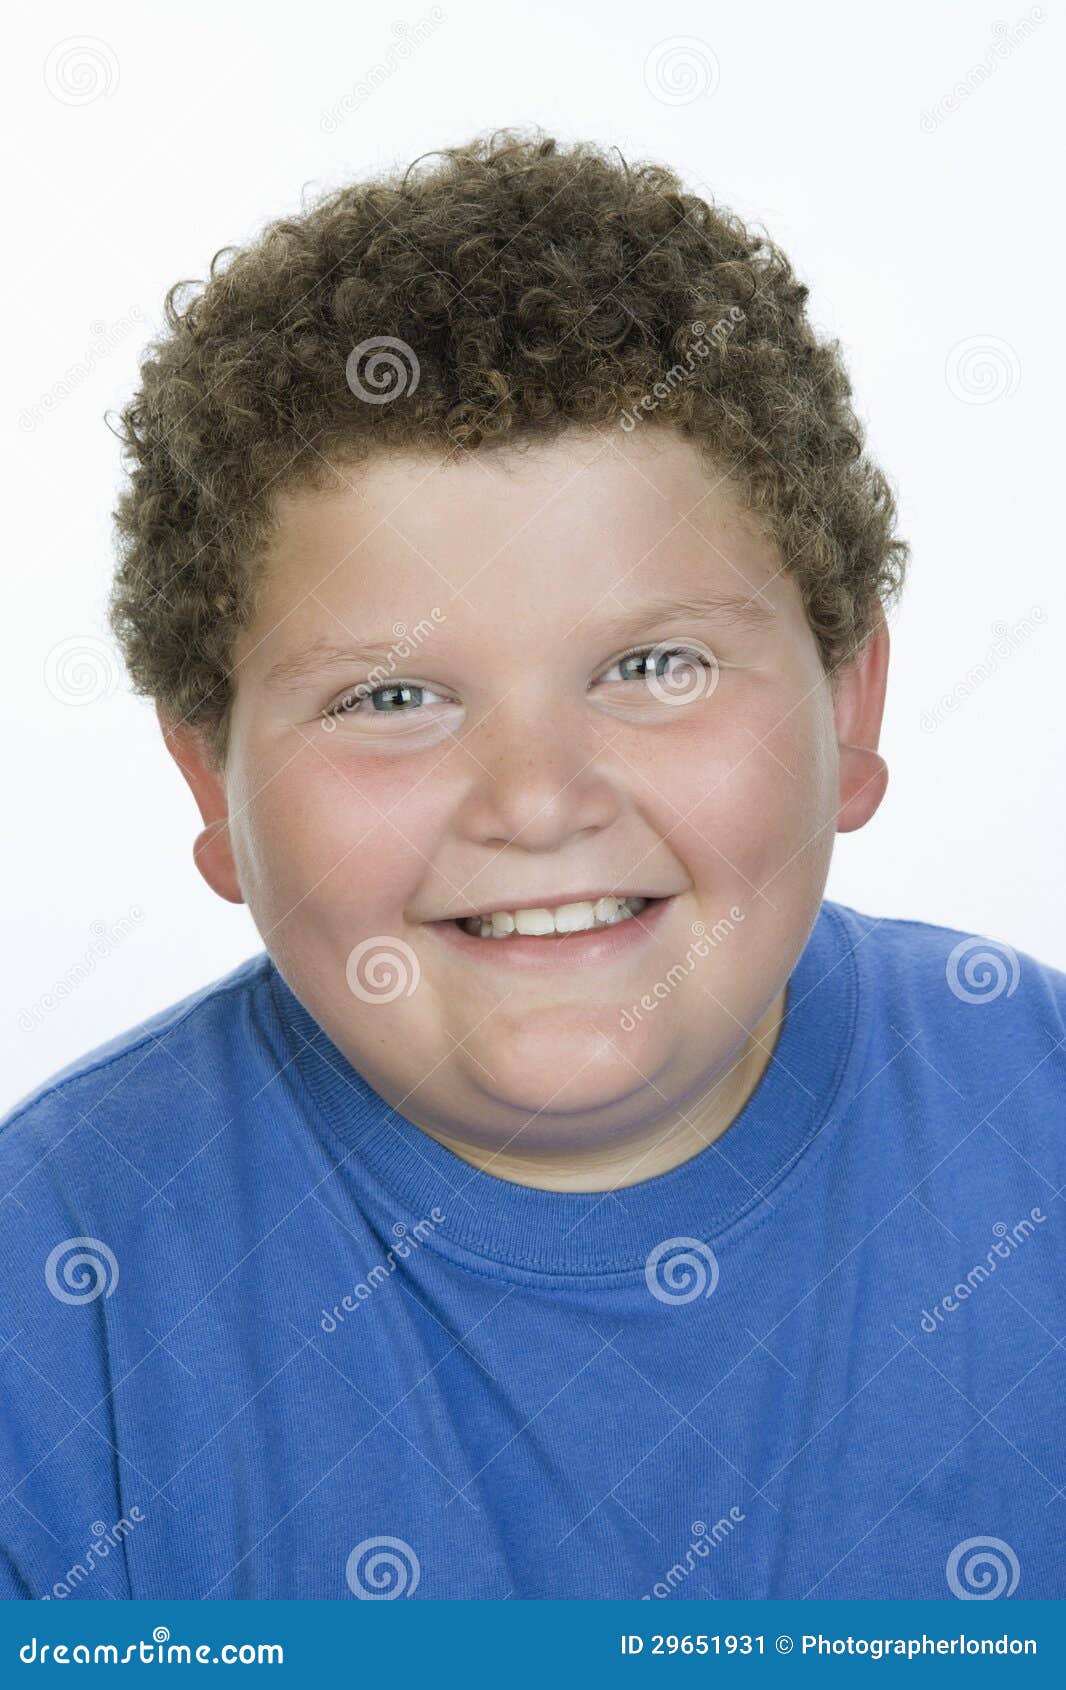 An Obese Teenage Boy Smiling Stock Image - Image of blue, curly: 29651931